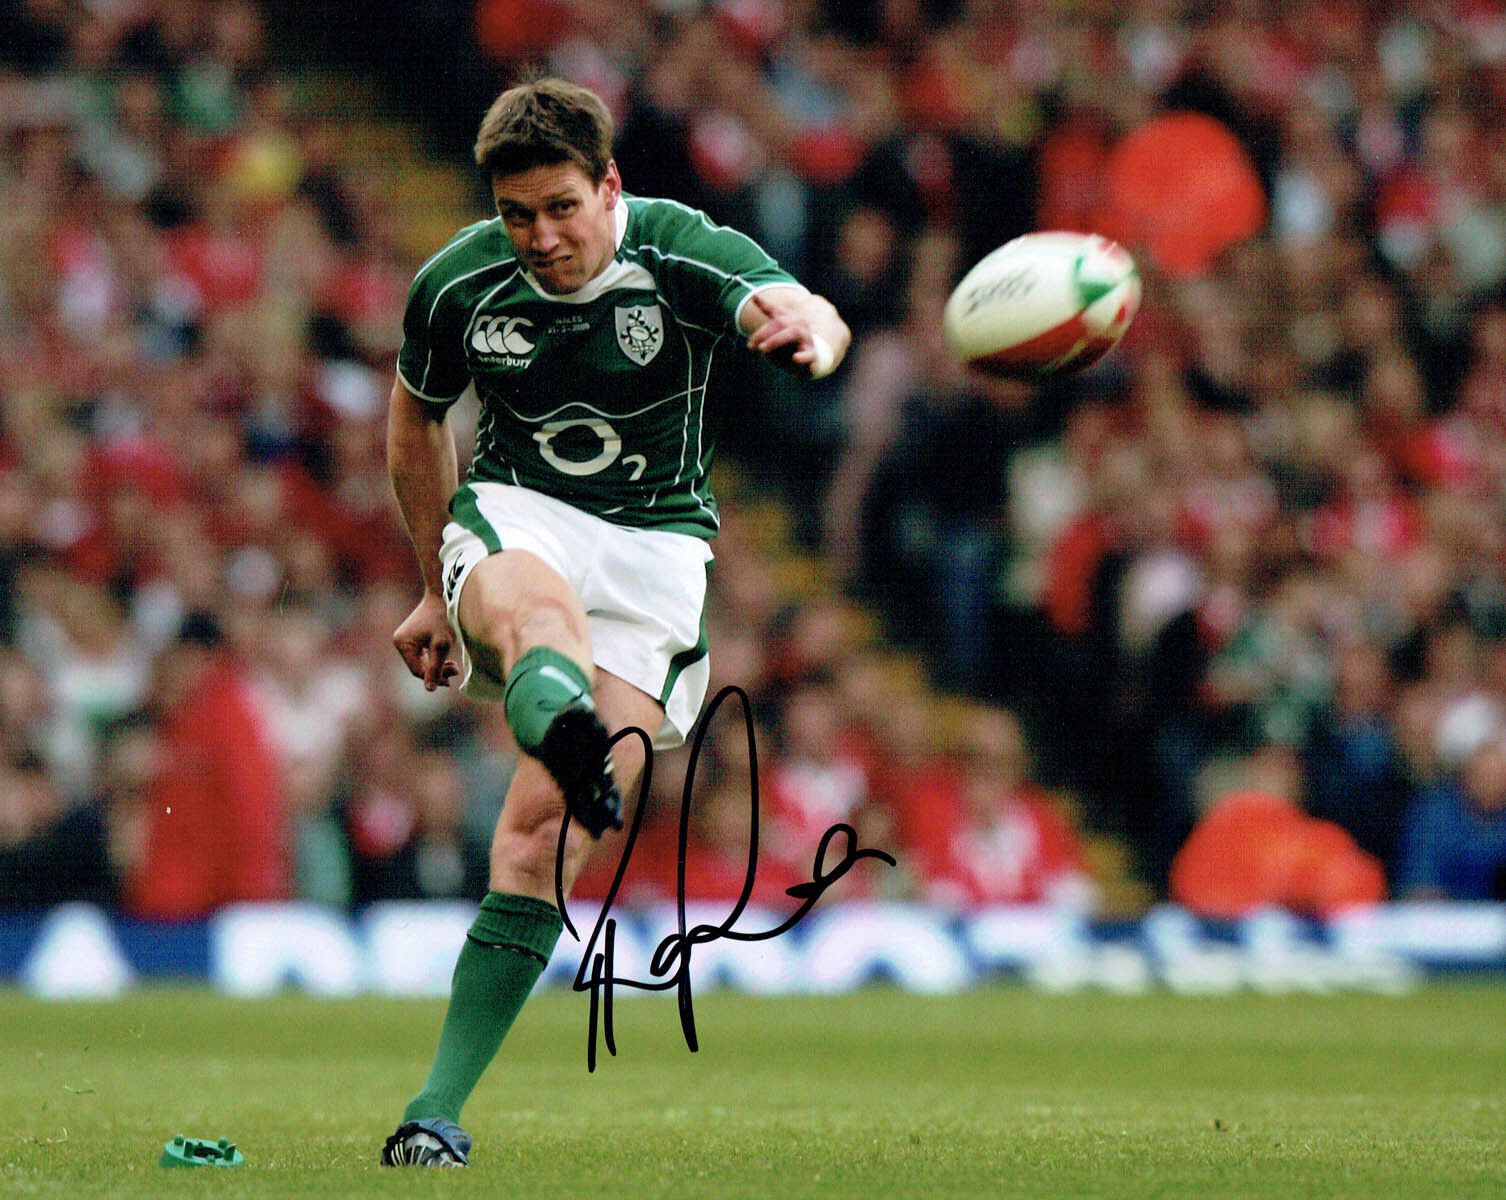 Ronan O'GARA Signed Autograph 10x8 Photo Poster painting AFTAL COA Ireland Rugby Union